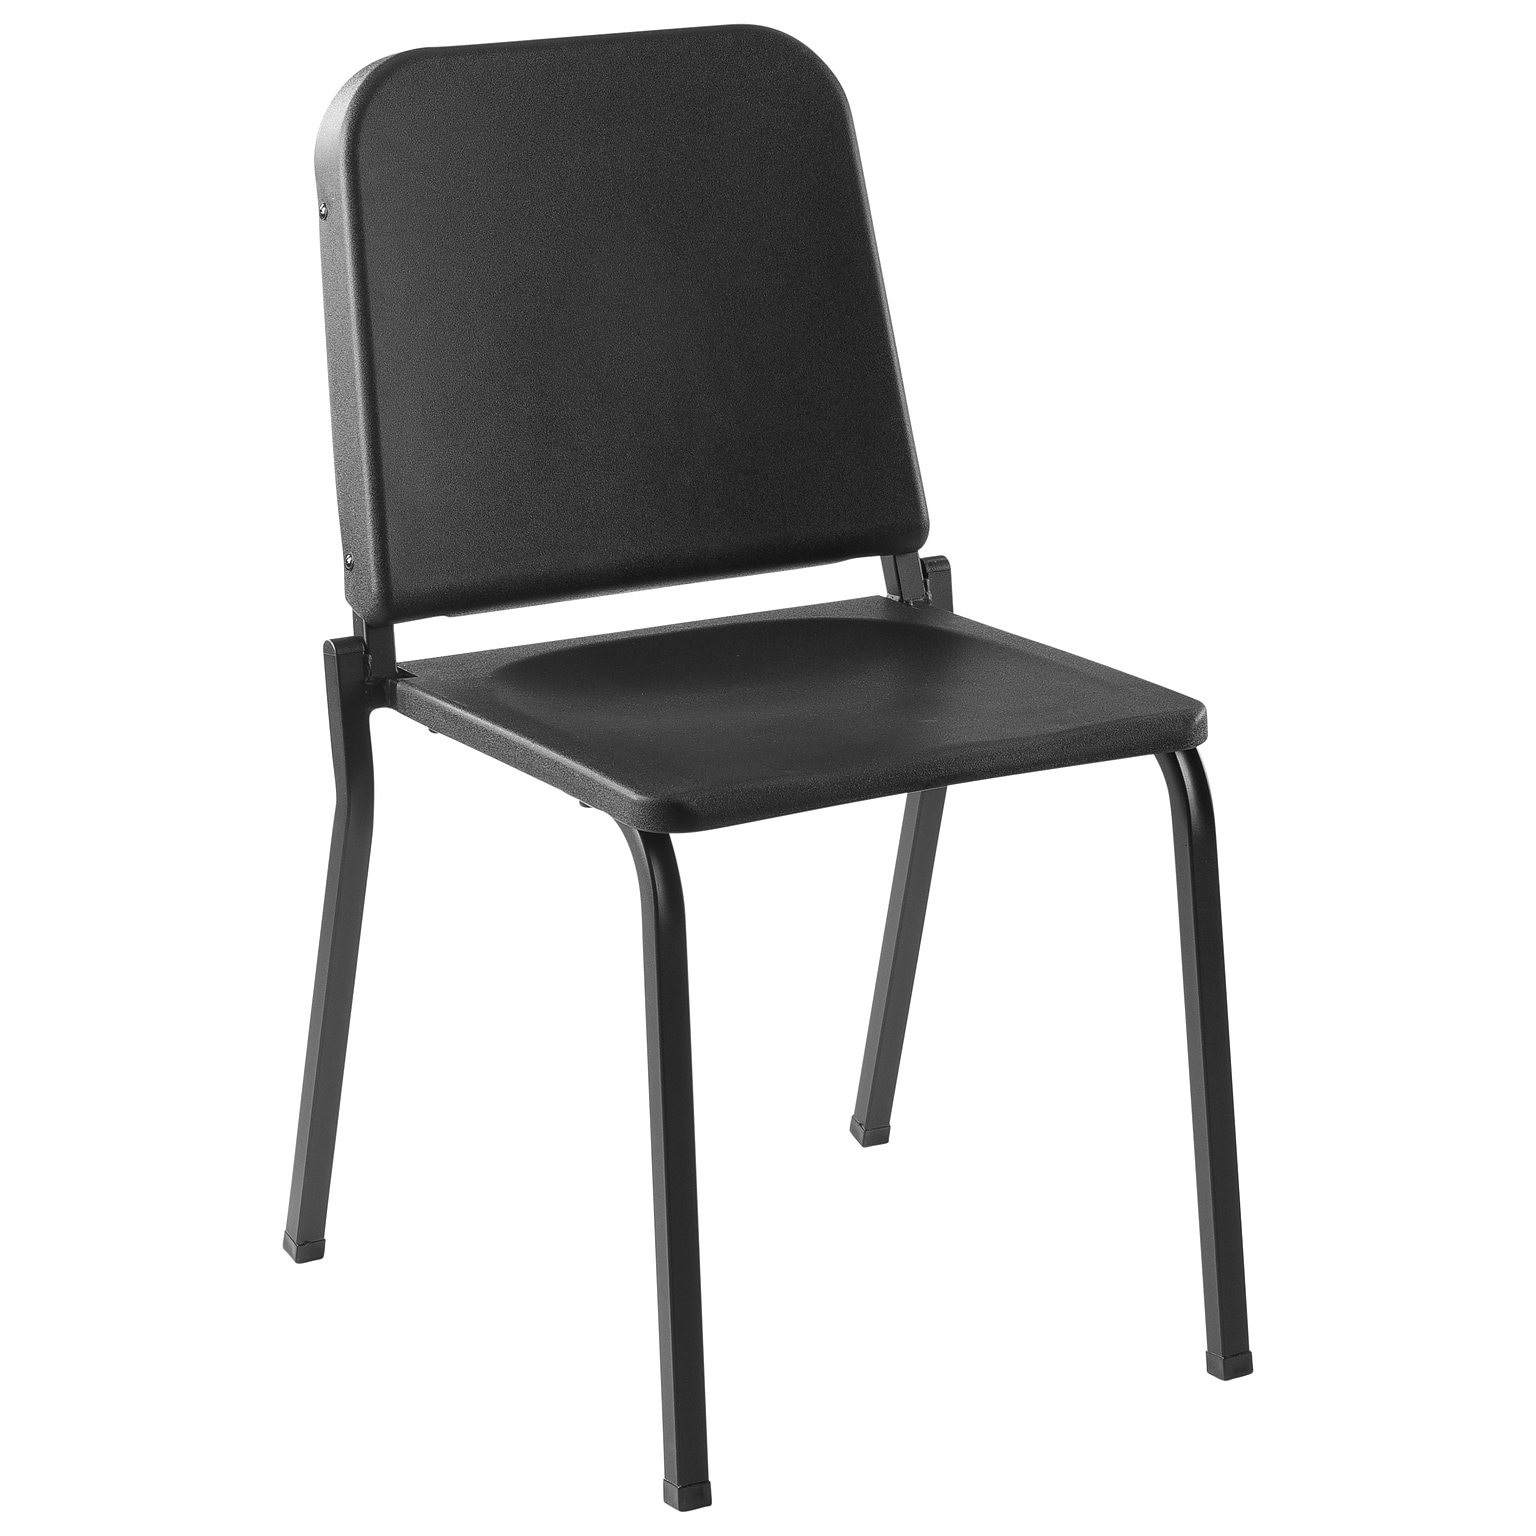 NPS 8200 Series Melody Music Chair (8210)